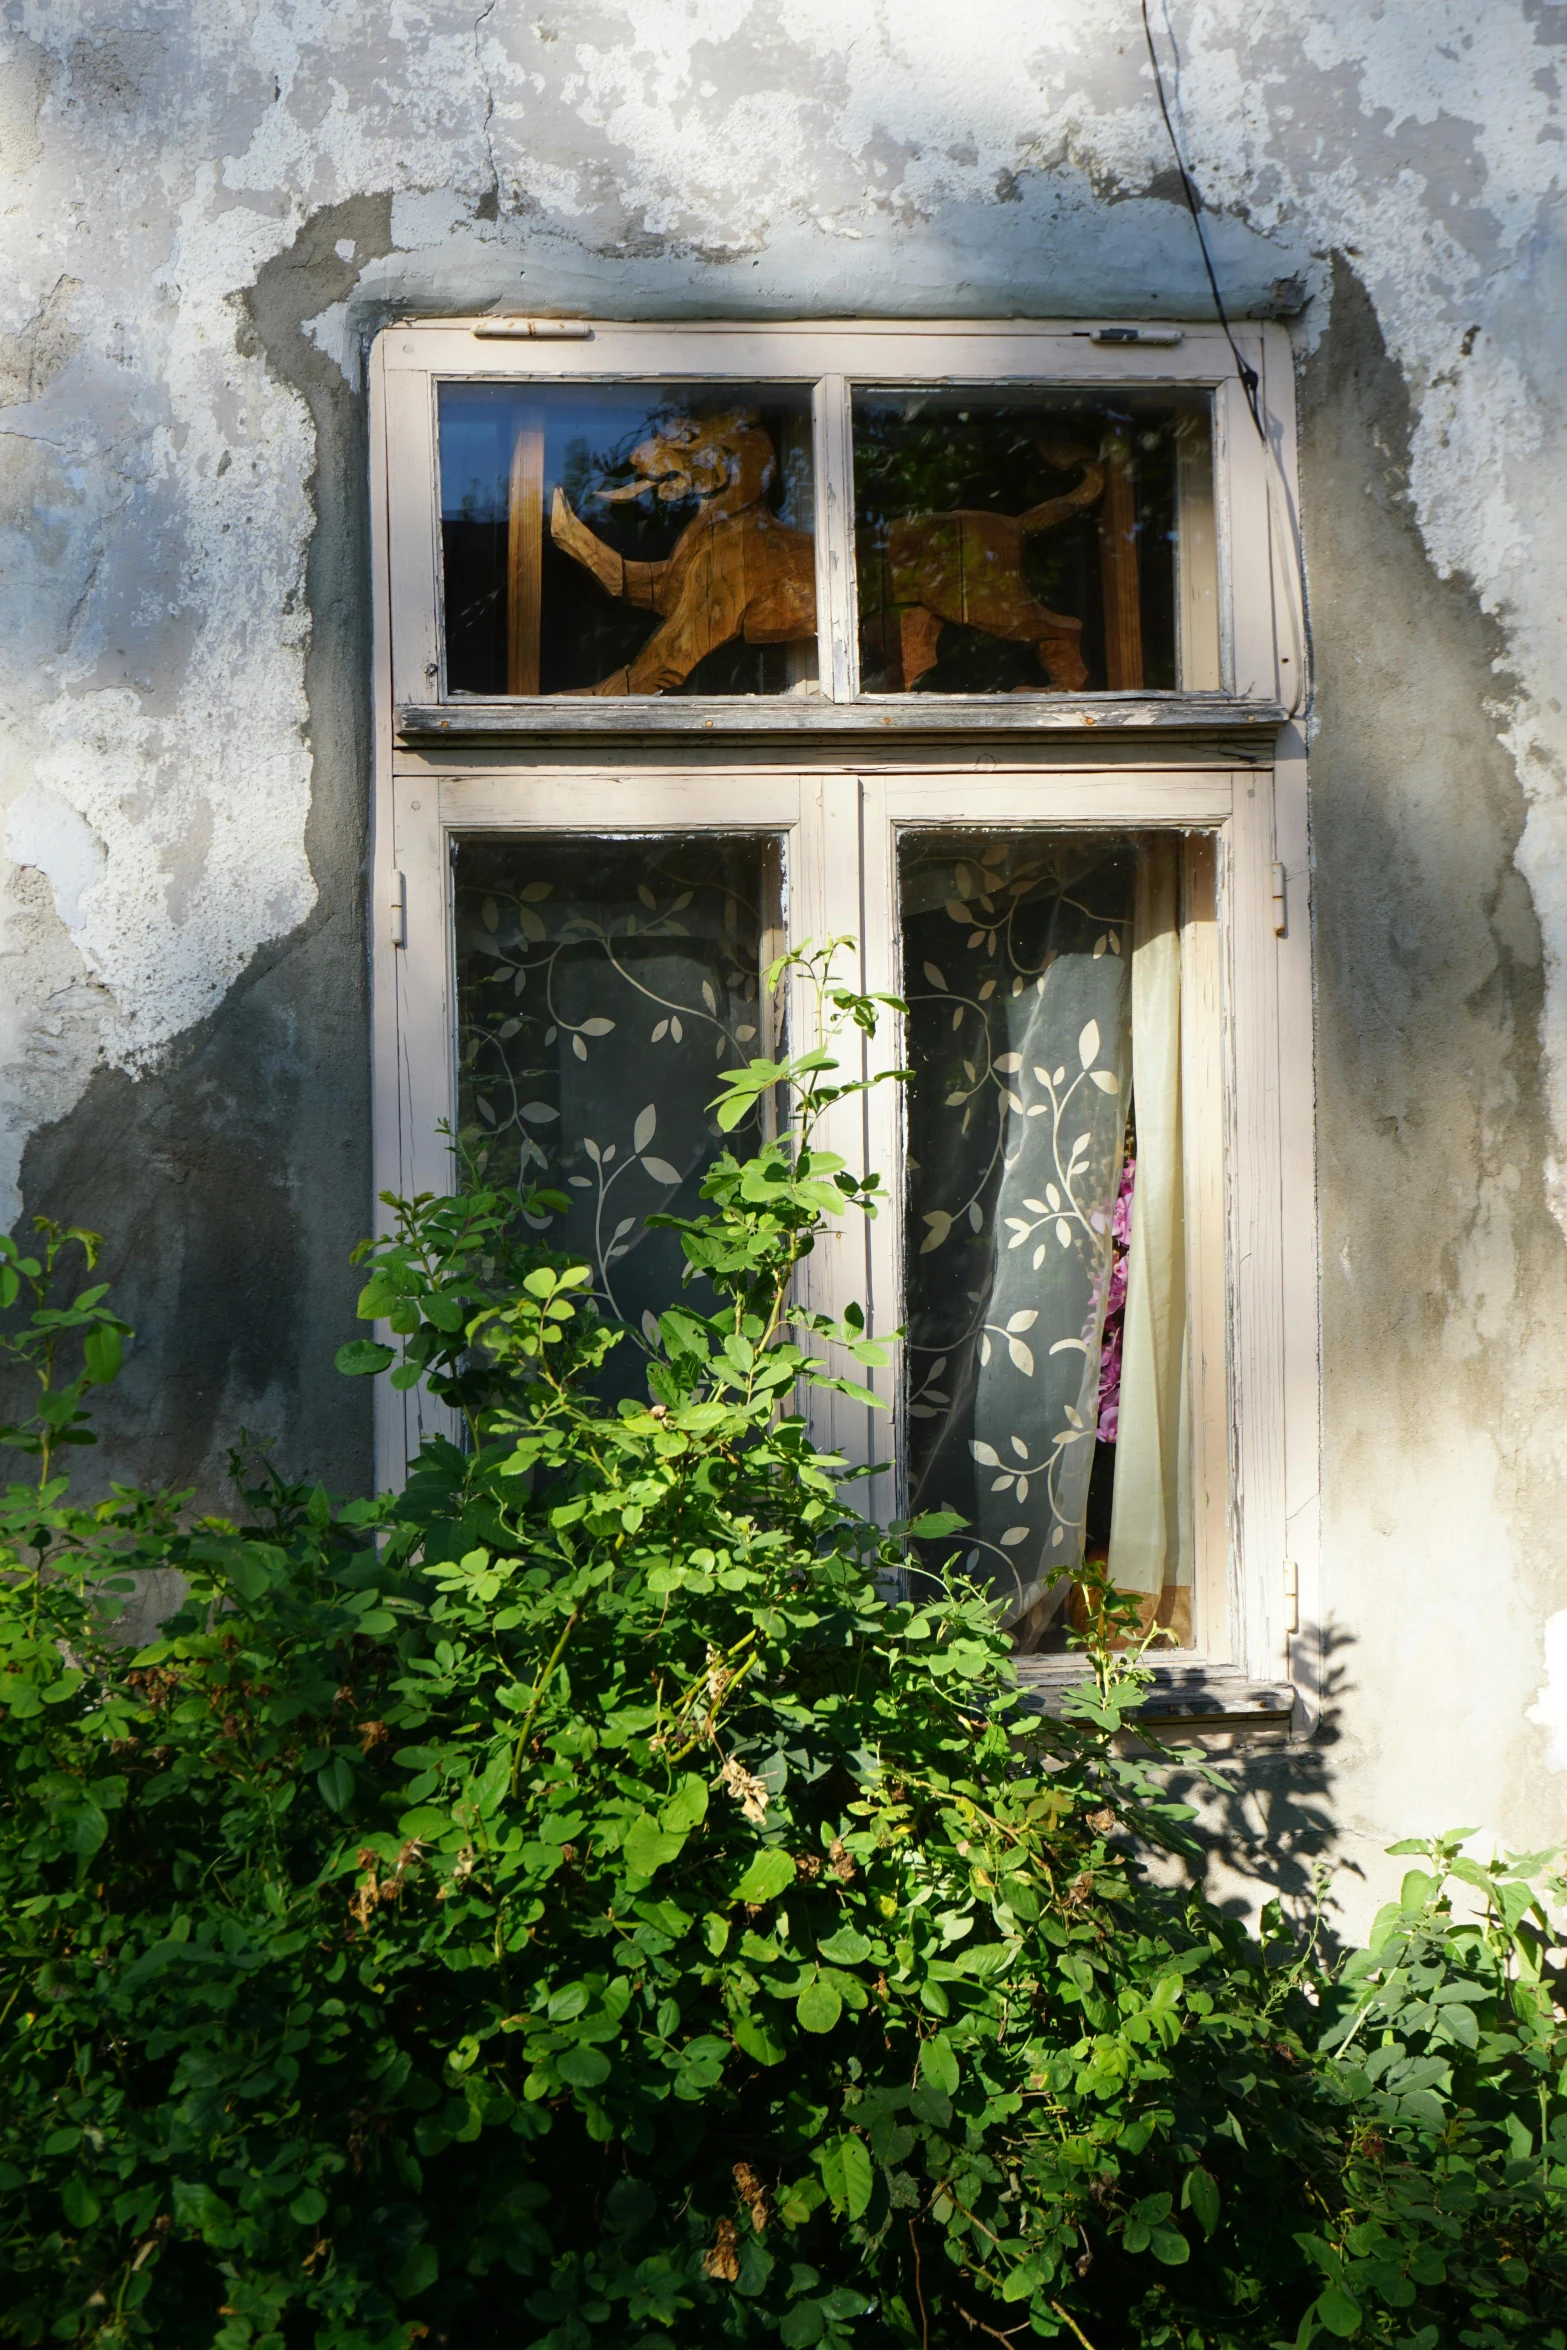 a very small window with an older woman figure in it